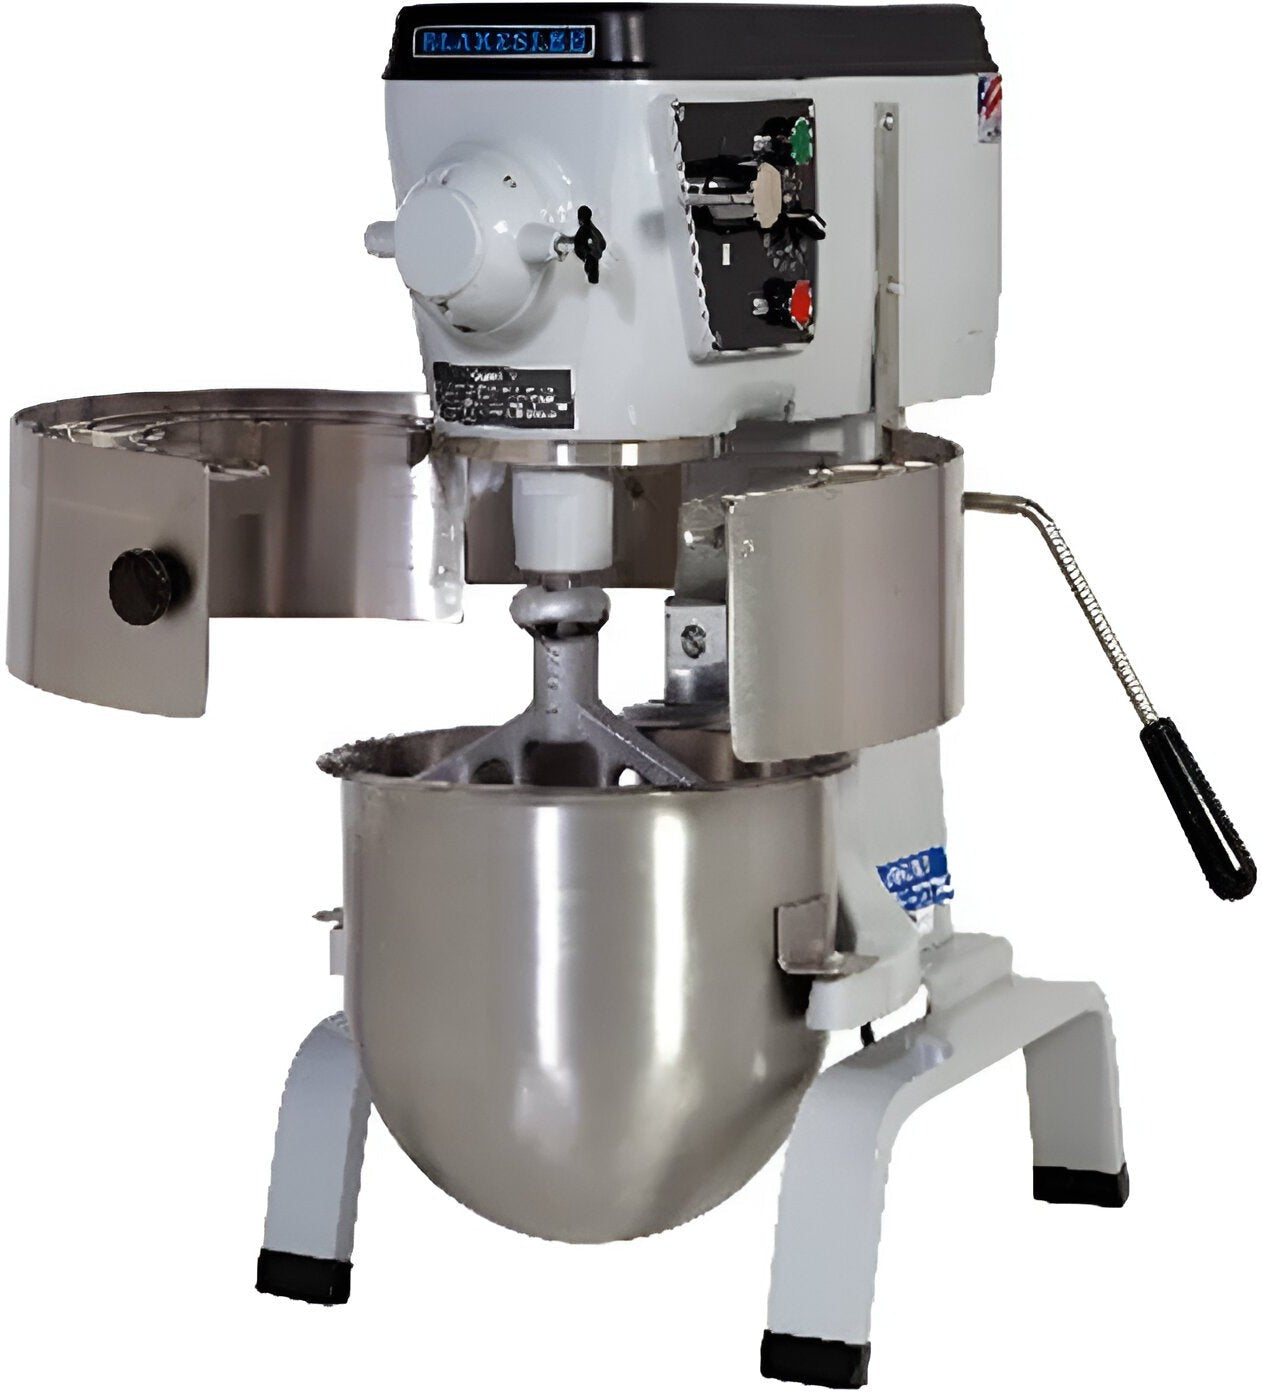 Blakeslee - 20 Qt Deluxe Stainless Steel Bench Planetary Mixer - B-20SS